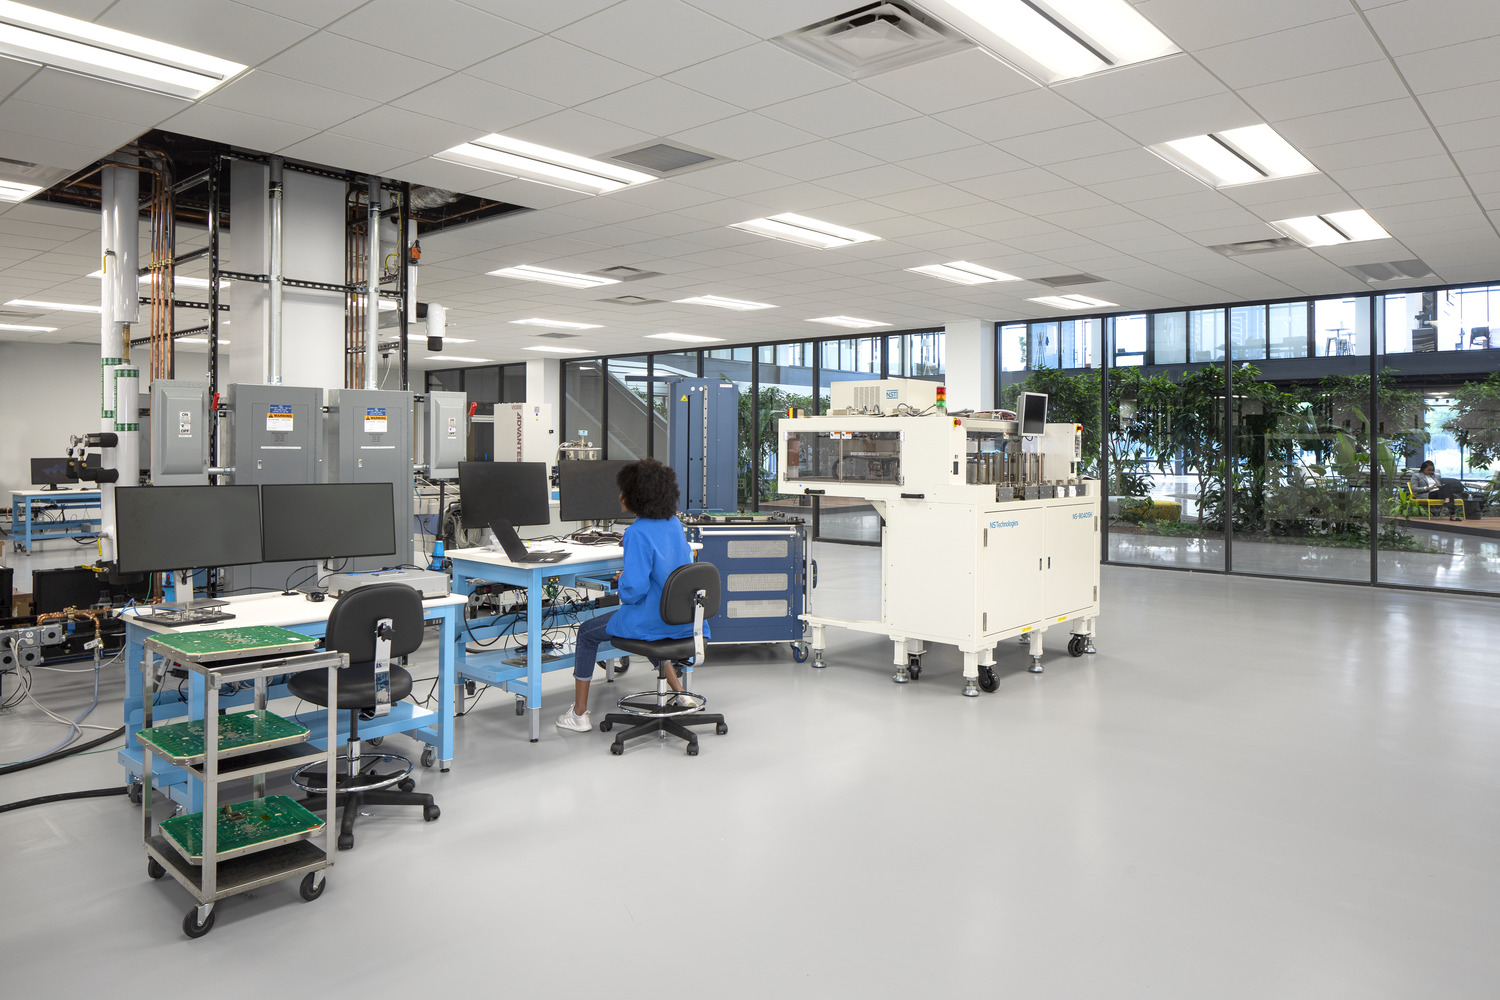 A large room with windows that show indoor plants. In the center there's lab equipment and a woman sits at a desk. This lab is at Analog Devices.